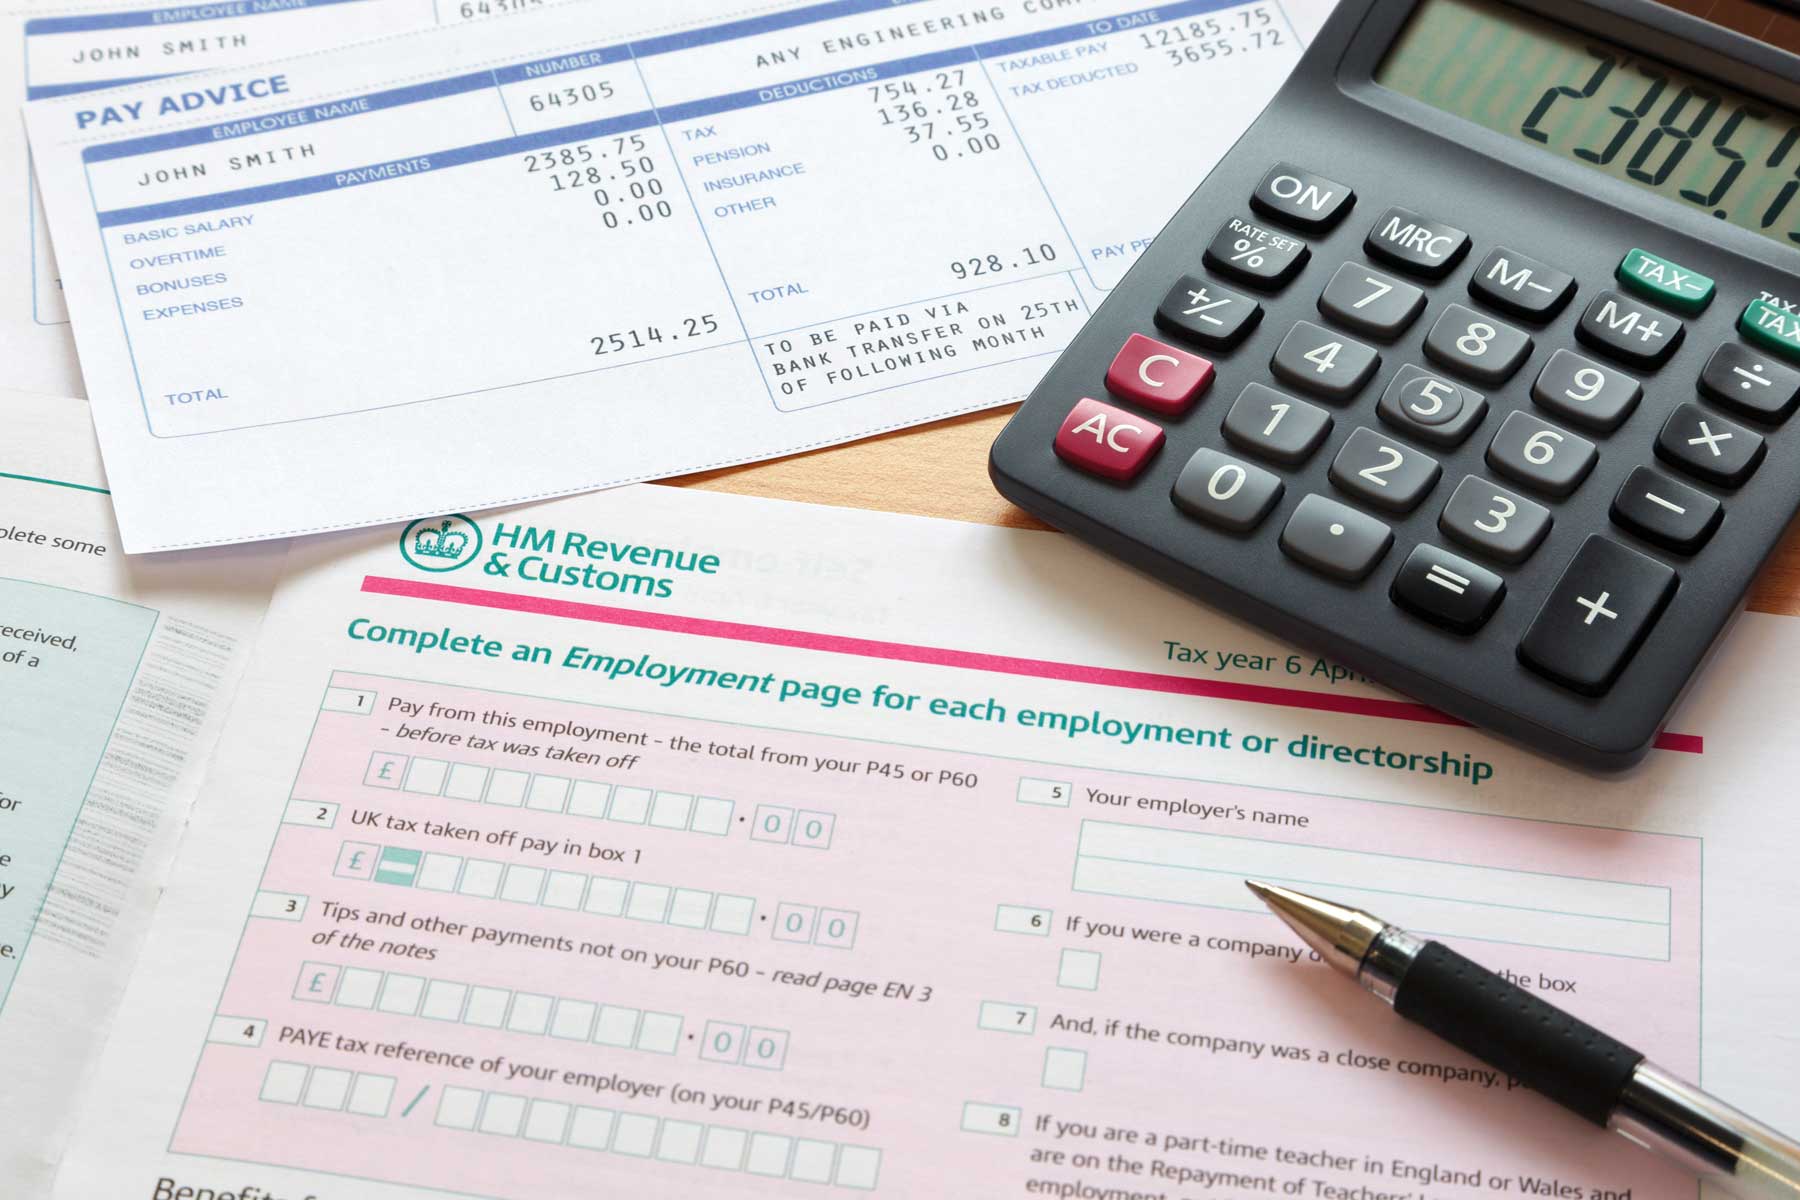 Photo of a UK self assessment tax return with calculator and payslips.